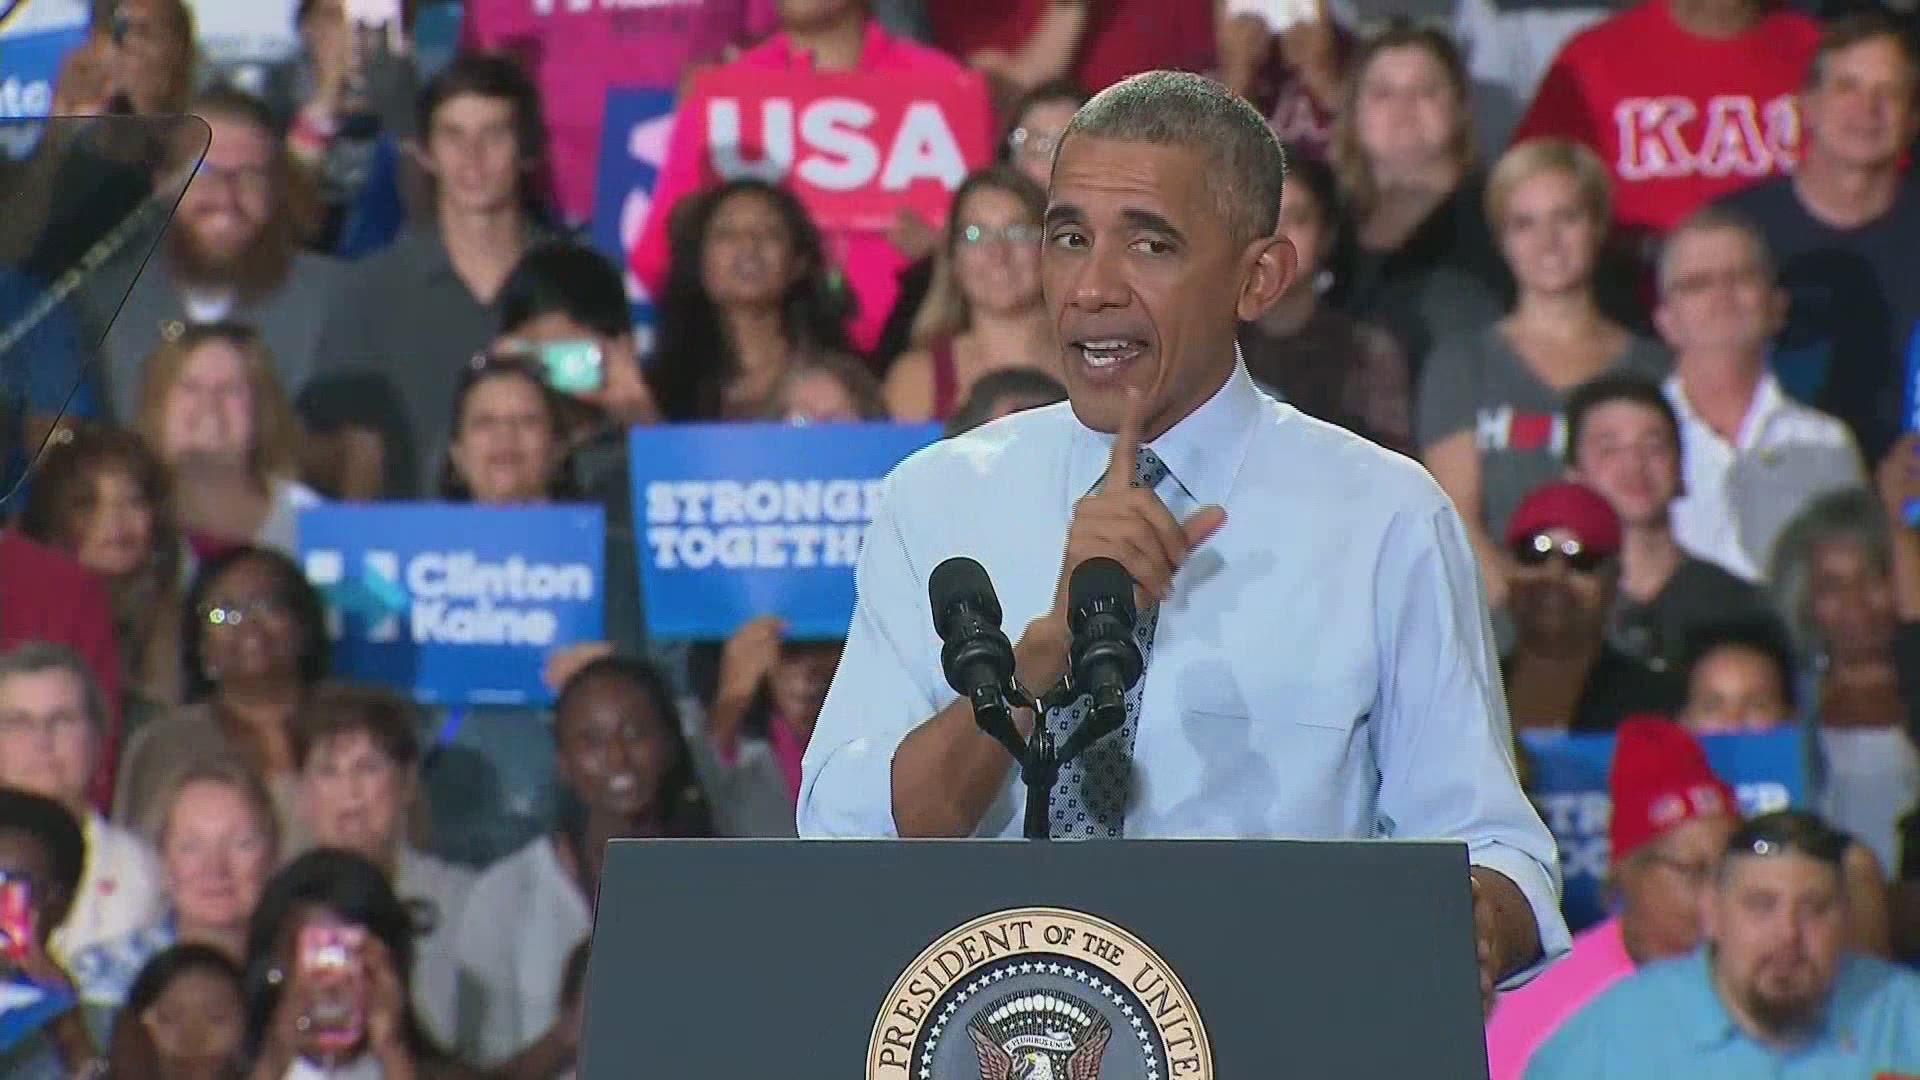 Nov. 1, 2016: During a campaign rally for Hillary Clinton in Columbus, President Obama spoke about everybody getting free tacos from Taco Bell and compared its ease to the voting process.